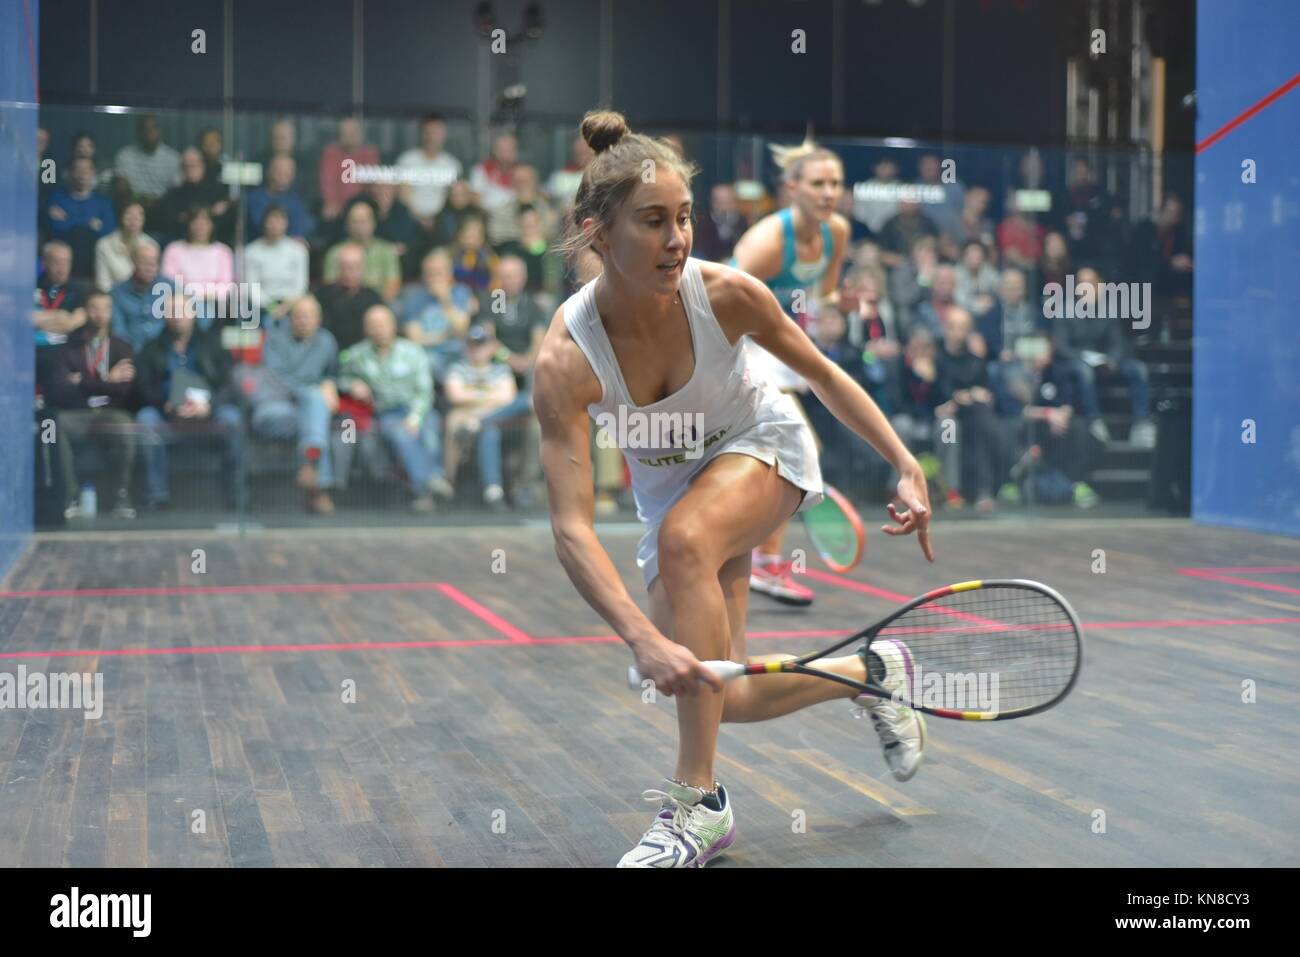 Manchester  UK  11th December 2017    Nele Gilis (Belgium) loses 4-11, 7-11, 4-11  to Laura Massaro  (England), the fourth seed, in the first round of the A J Bell PSA World Championships in Manchester. Stock Photo